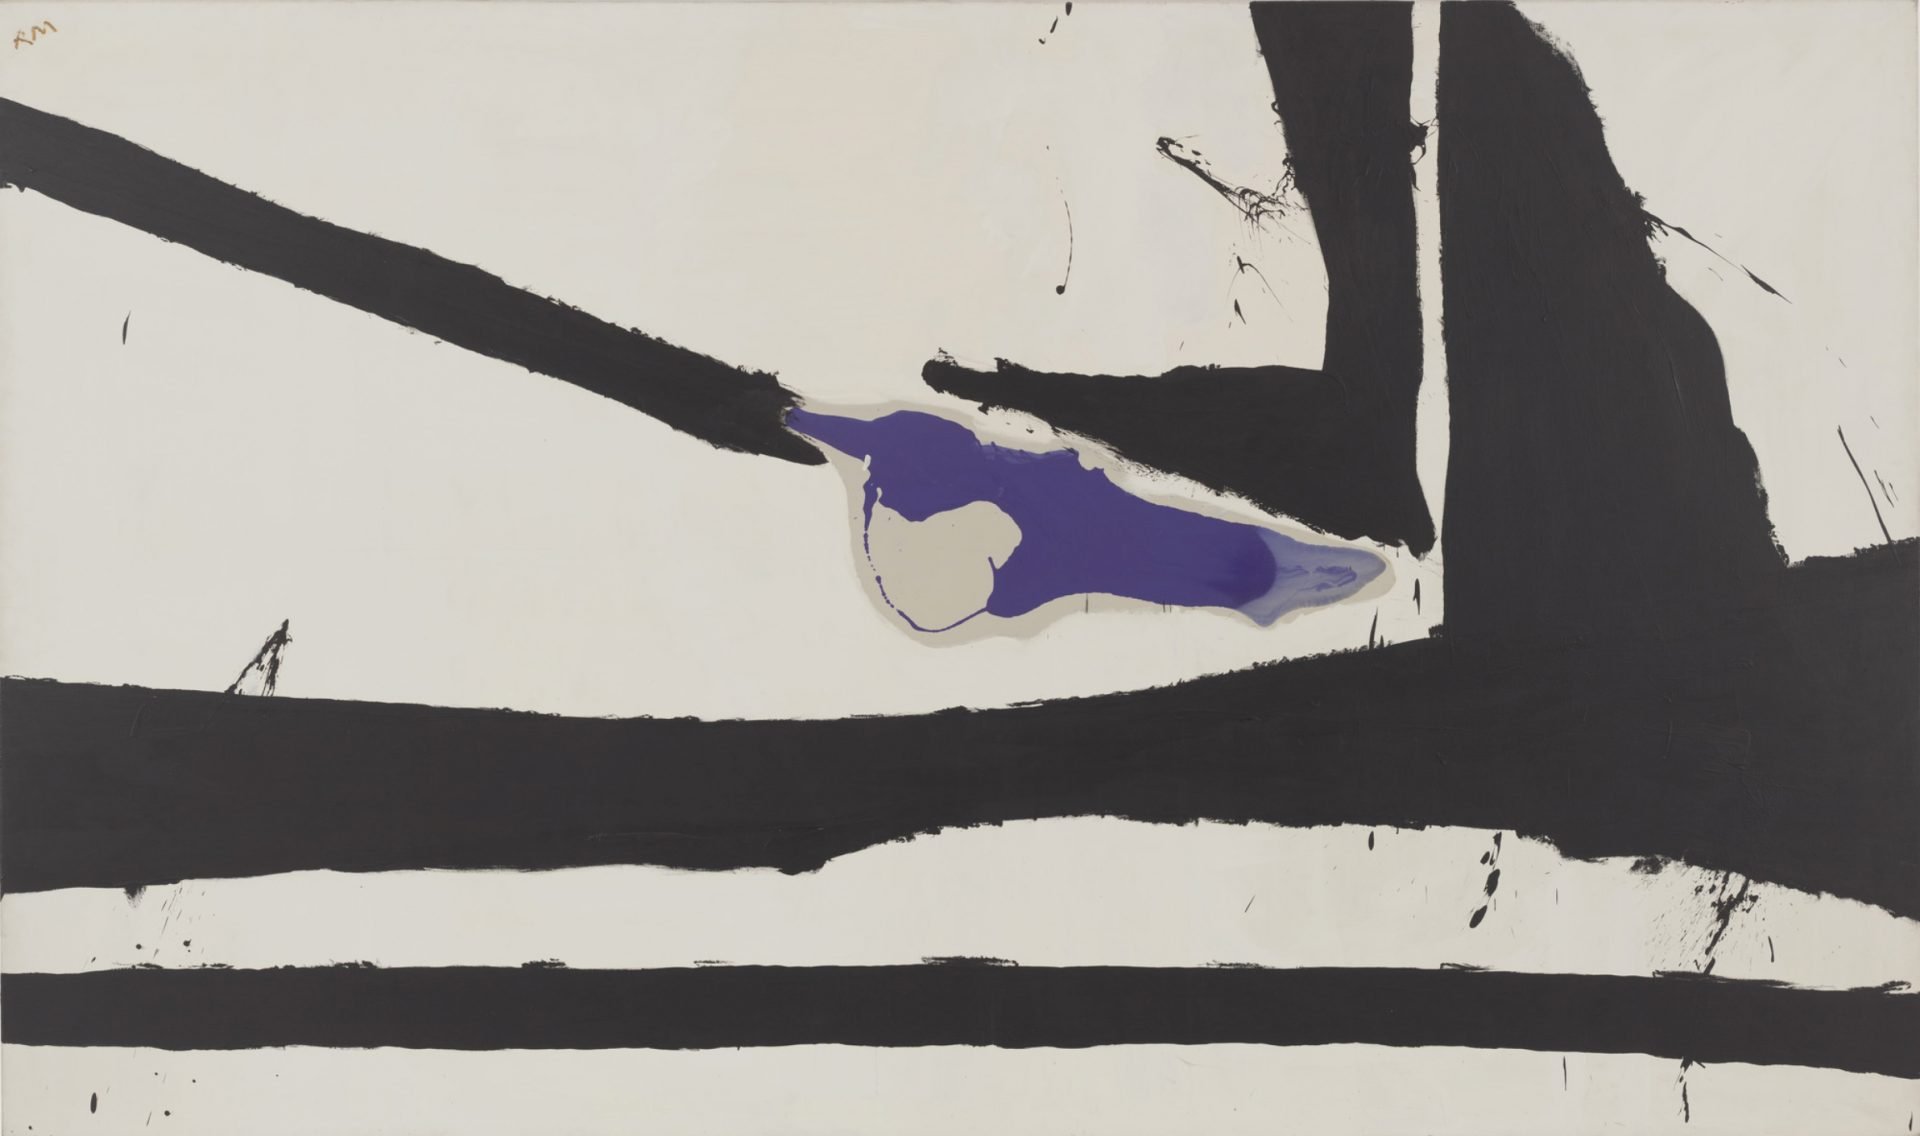 "New England Elegy 2" by Robert Motherwell, 1965-66, an abstract expressionist painting with bold black horizontal and vertical brushstrokes on a white background, and a focal blue shape, forming an 'L' or rectangular composition.